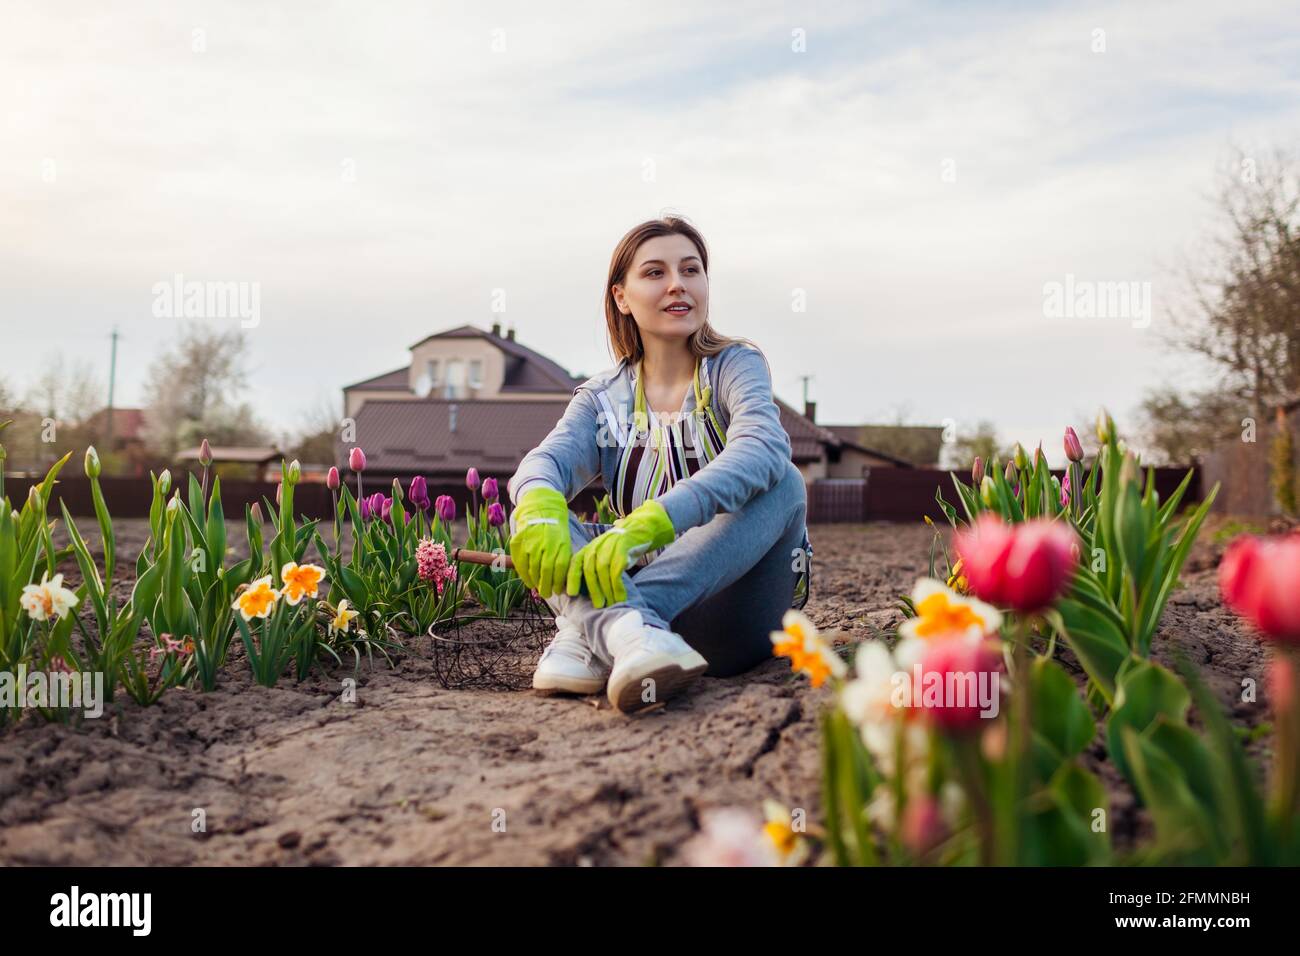 Young gardener relaxing among fresh tulips, daffodils, hyacinths in spring garden. Happy woman enjoys colorful flowers sitting on the ground Stock Photo